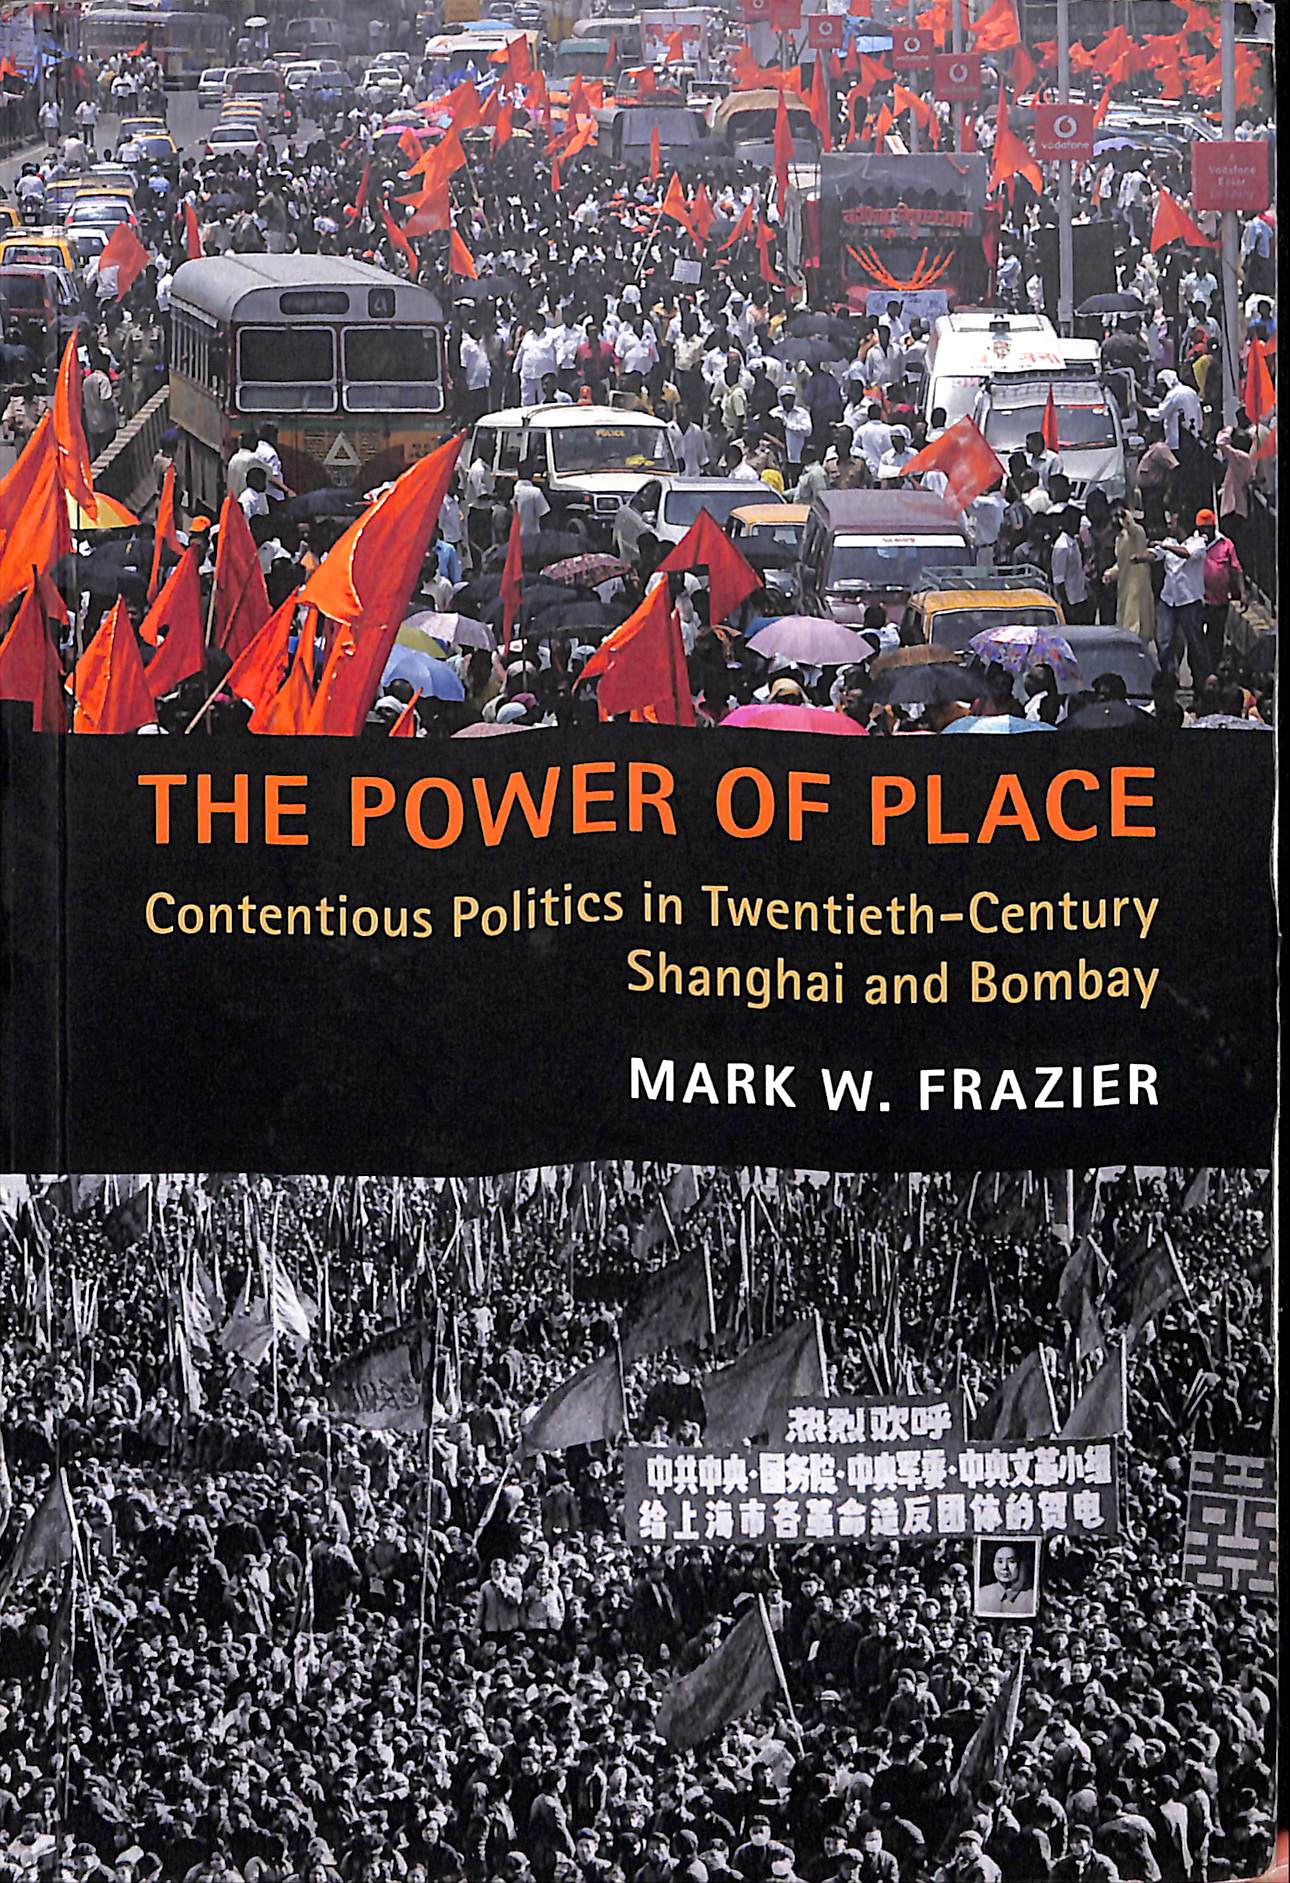 The power of place contentious politics in twentieth-century Shanghai and Bombay